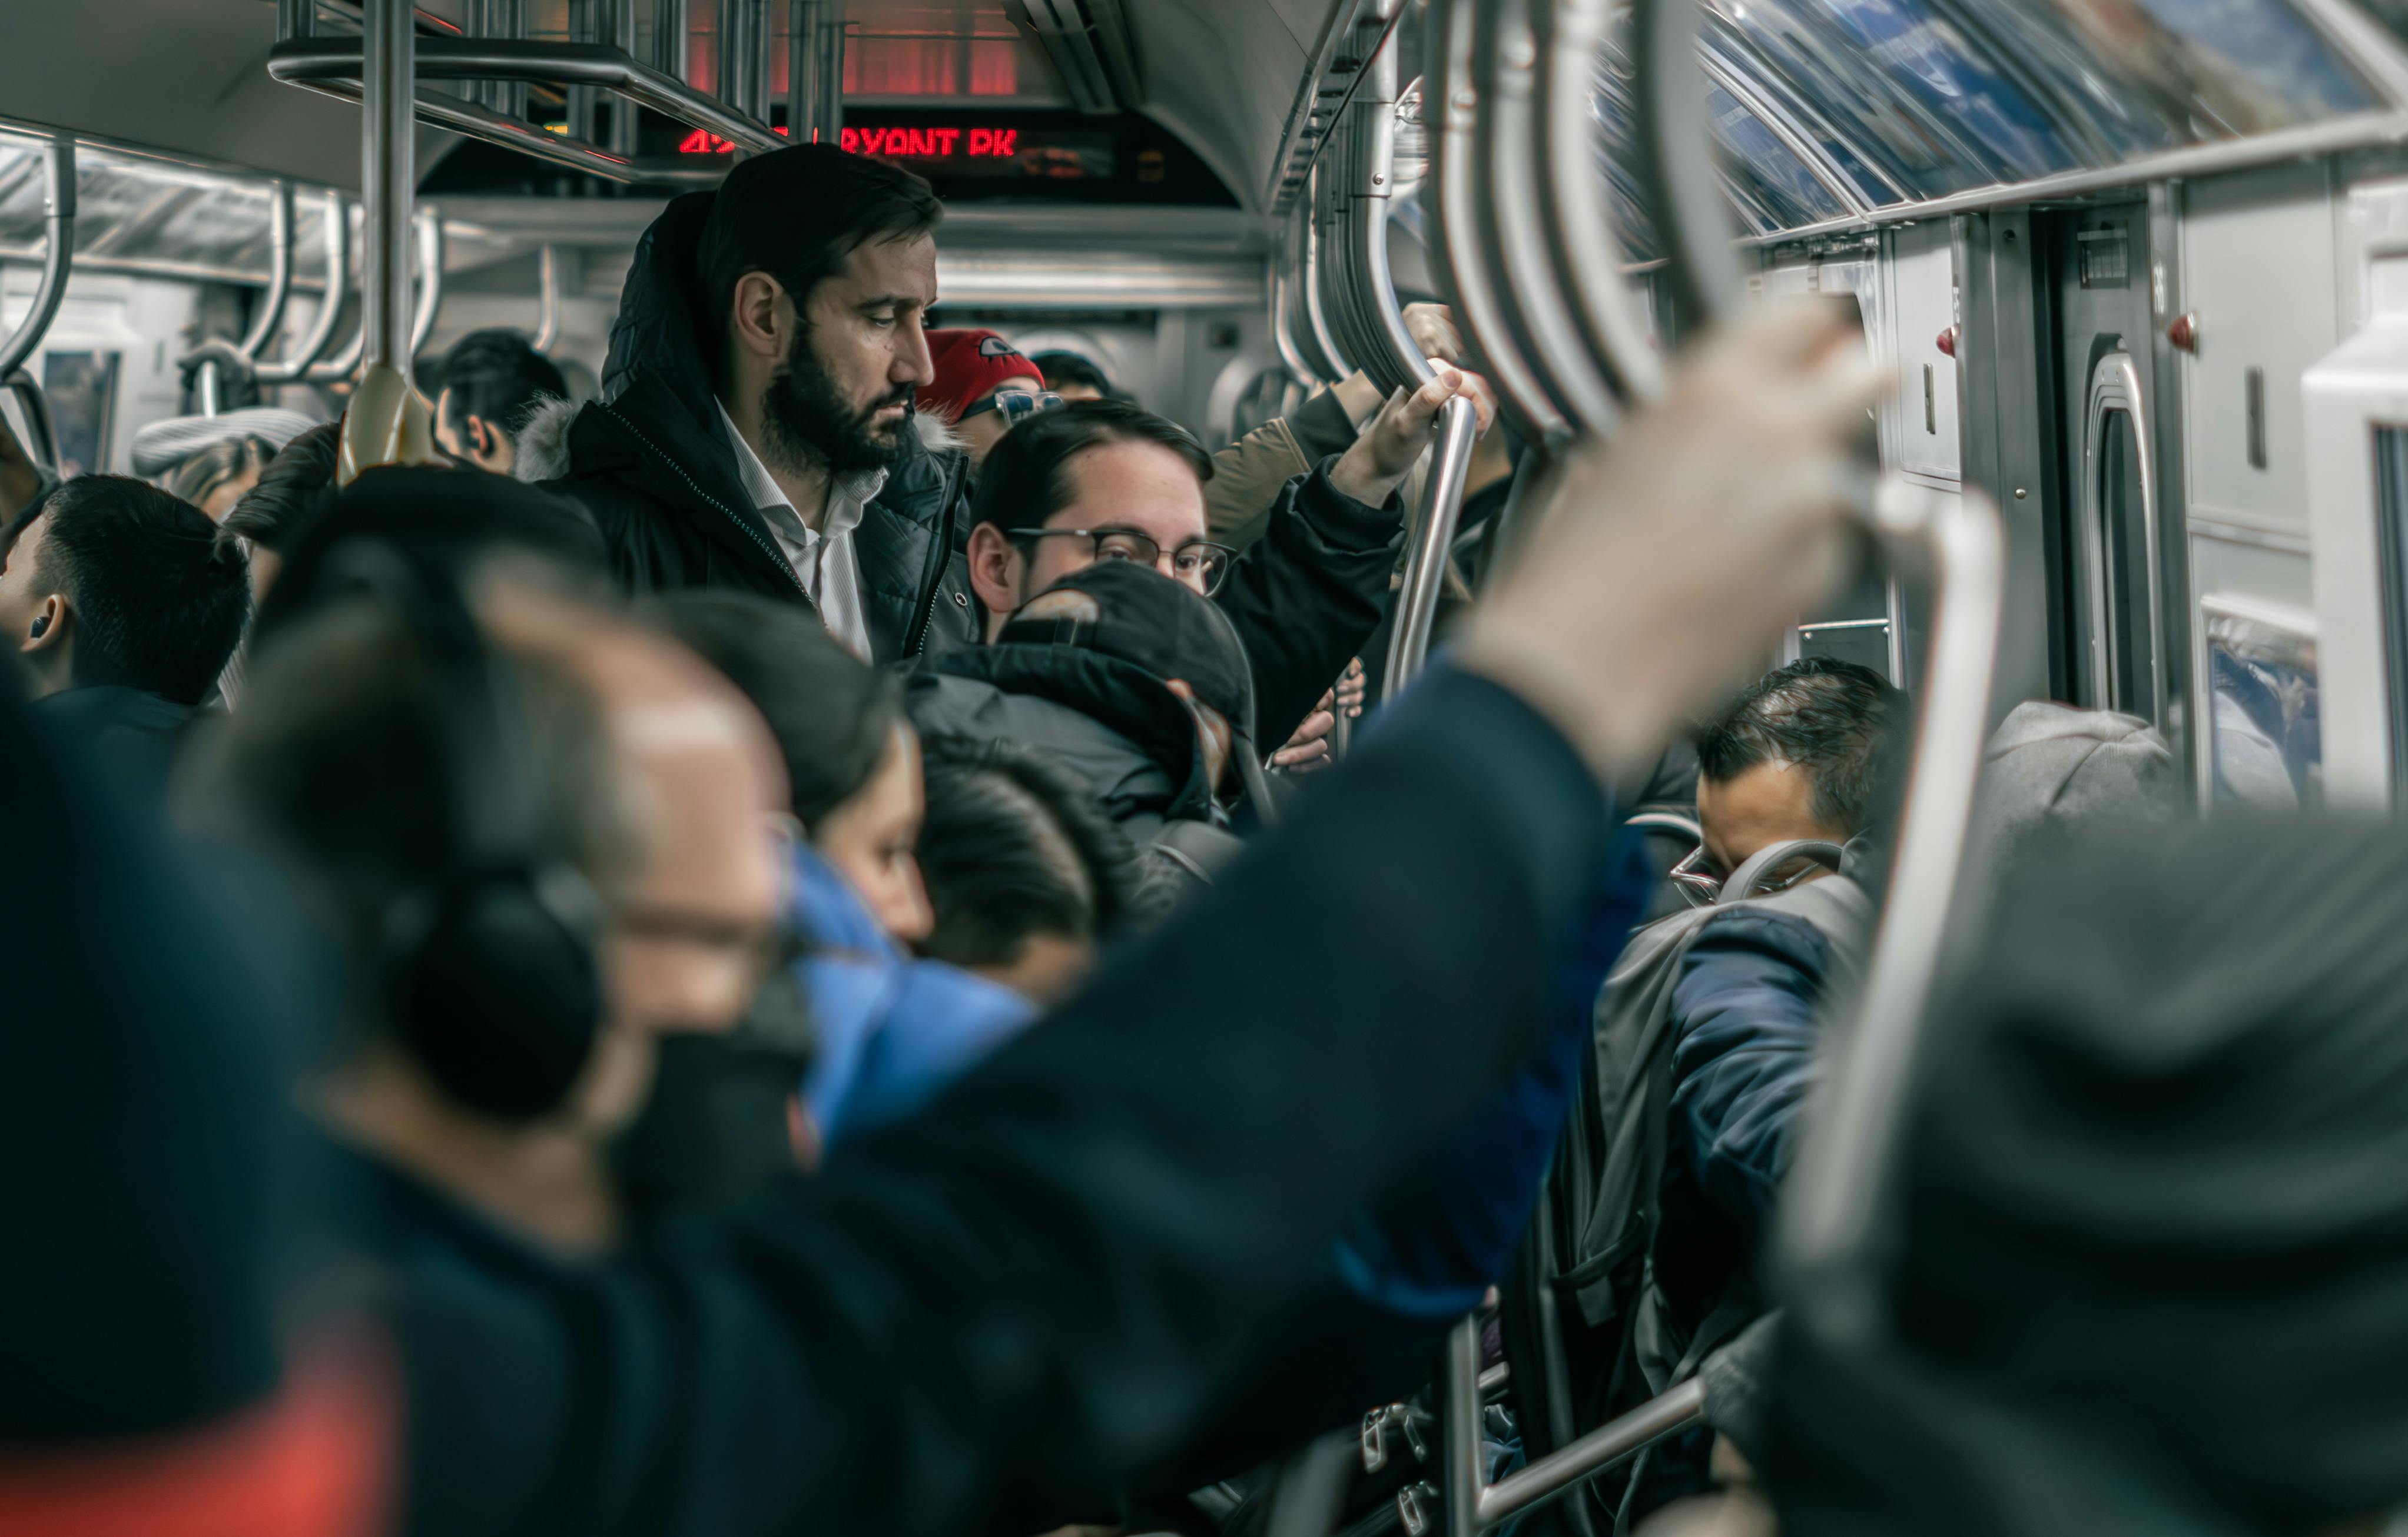 Passengers on the crowded bus answer the woman's pointed question about the cash she "found" | Source: Pexels